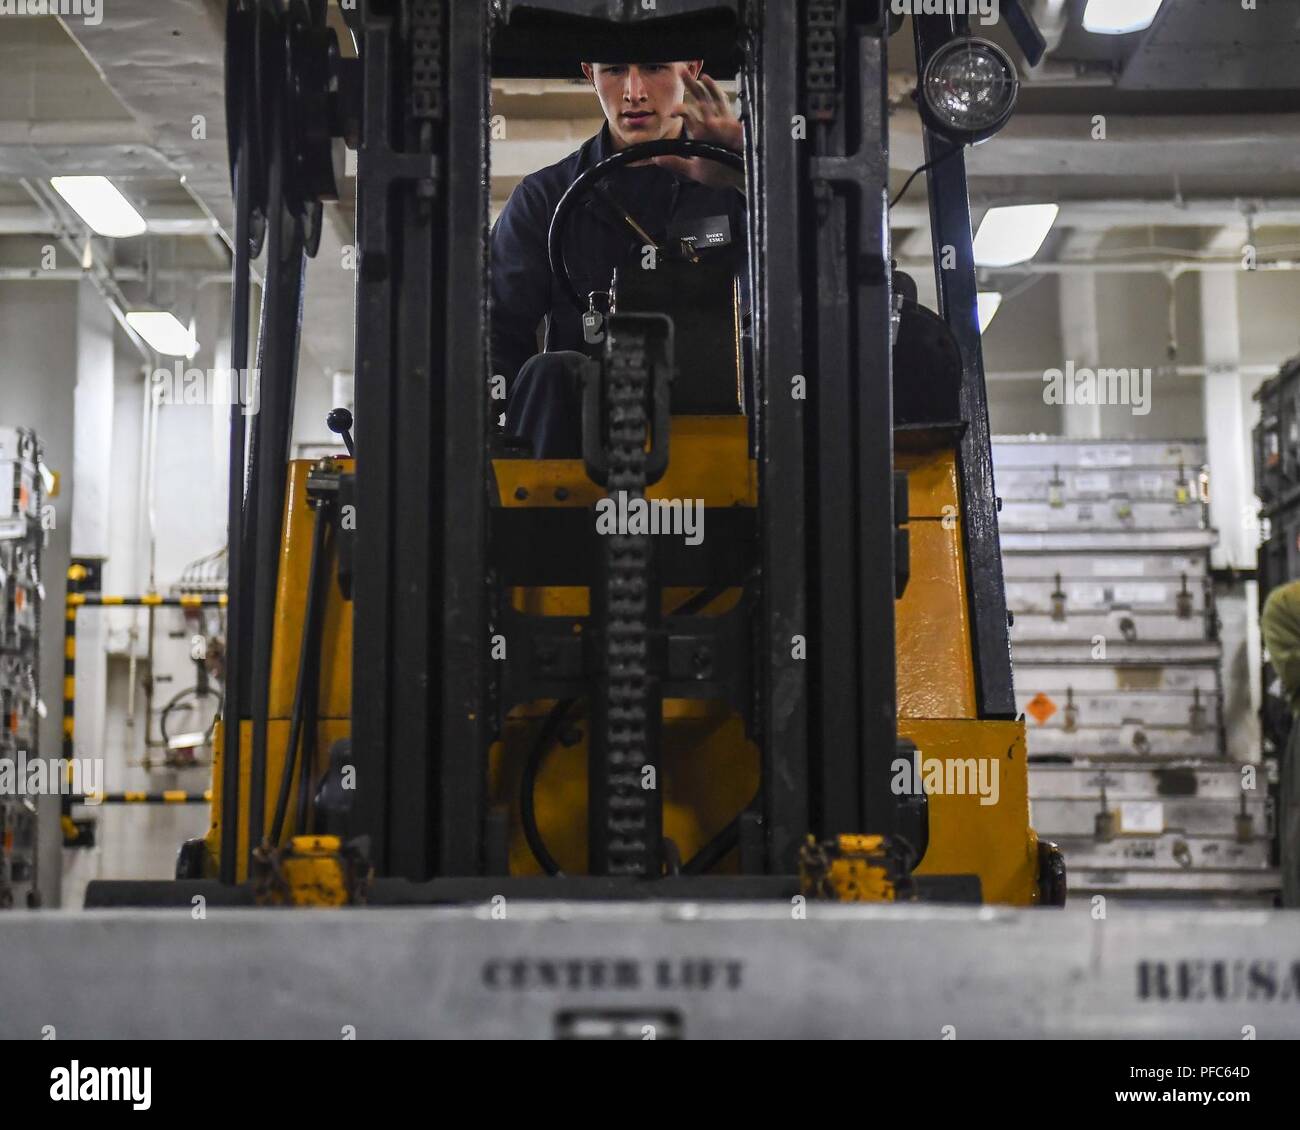 PACIFIC OCEAN (June 7, 2018) – Aviation Ordnanceman 3rd Class Gabriel Snider, a native of Sacramento, Calif., uses a forklift to transfer Rim-7 missiles in the weapons magazine aboard Wasp-class amphibious assault ship USS Essex (LHD 2) during a composite training unit exercise (COMPTUEX). COMPTUEX is the final pre-deployment exercise which certifies the combined Essex Amphibious Ready Group and 13th Marine Expeditionary Unit's abilities to conduct military operations at sea and project power ashore during their upcoming deployment in summer of 2018. Stock Photo